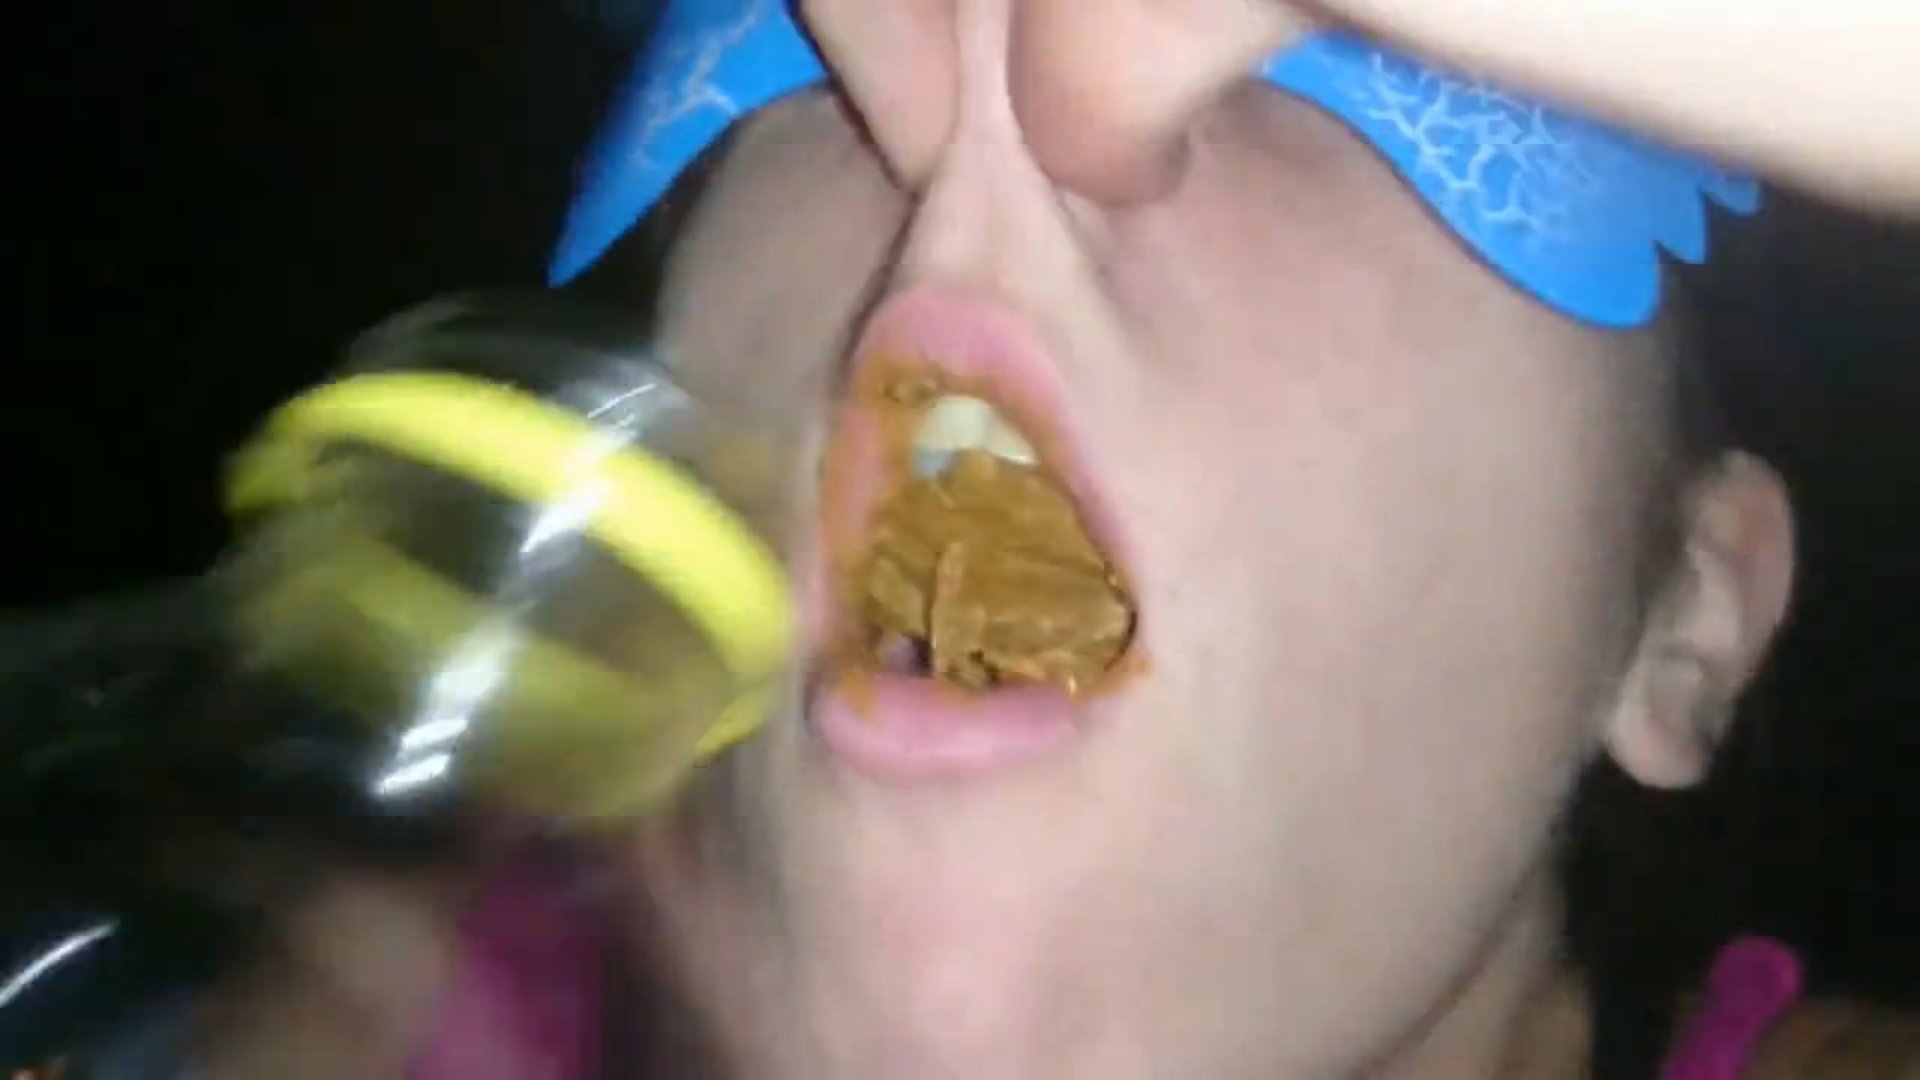 Amateur Scat Teens Real Feeding Lots Of Piss And Shit - Scat.World